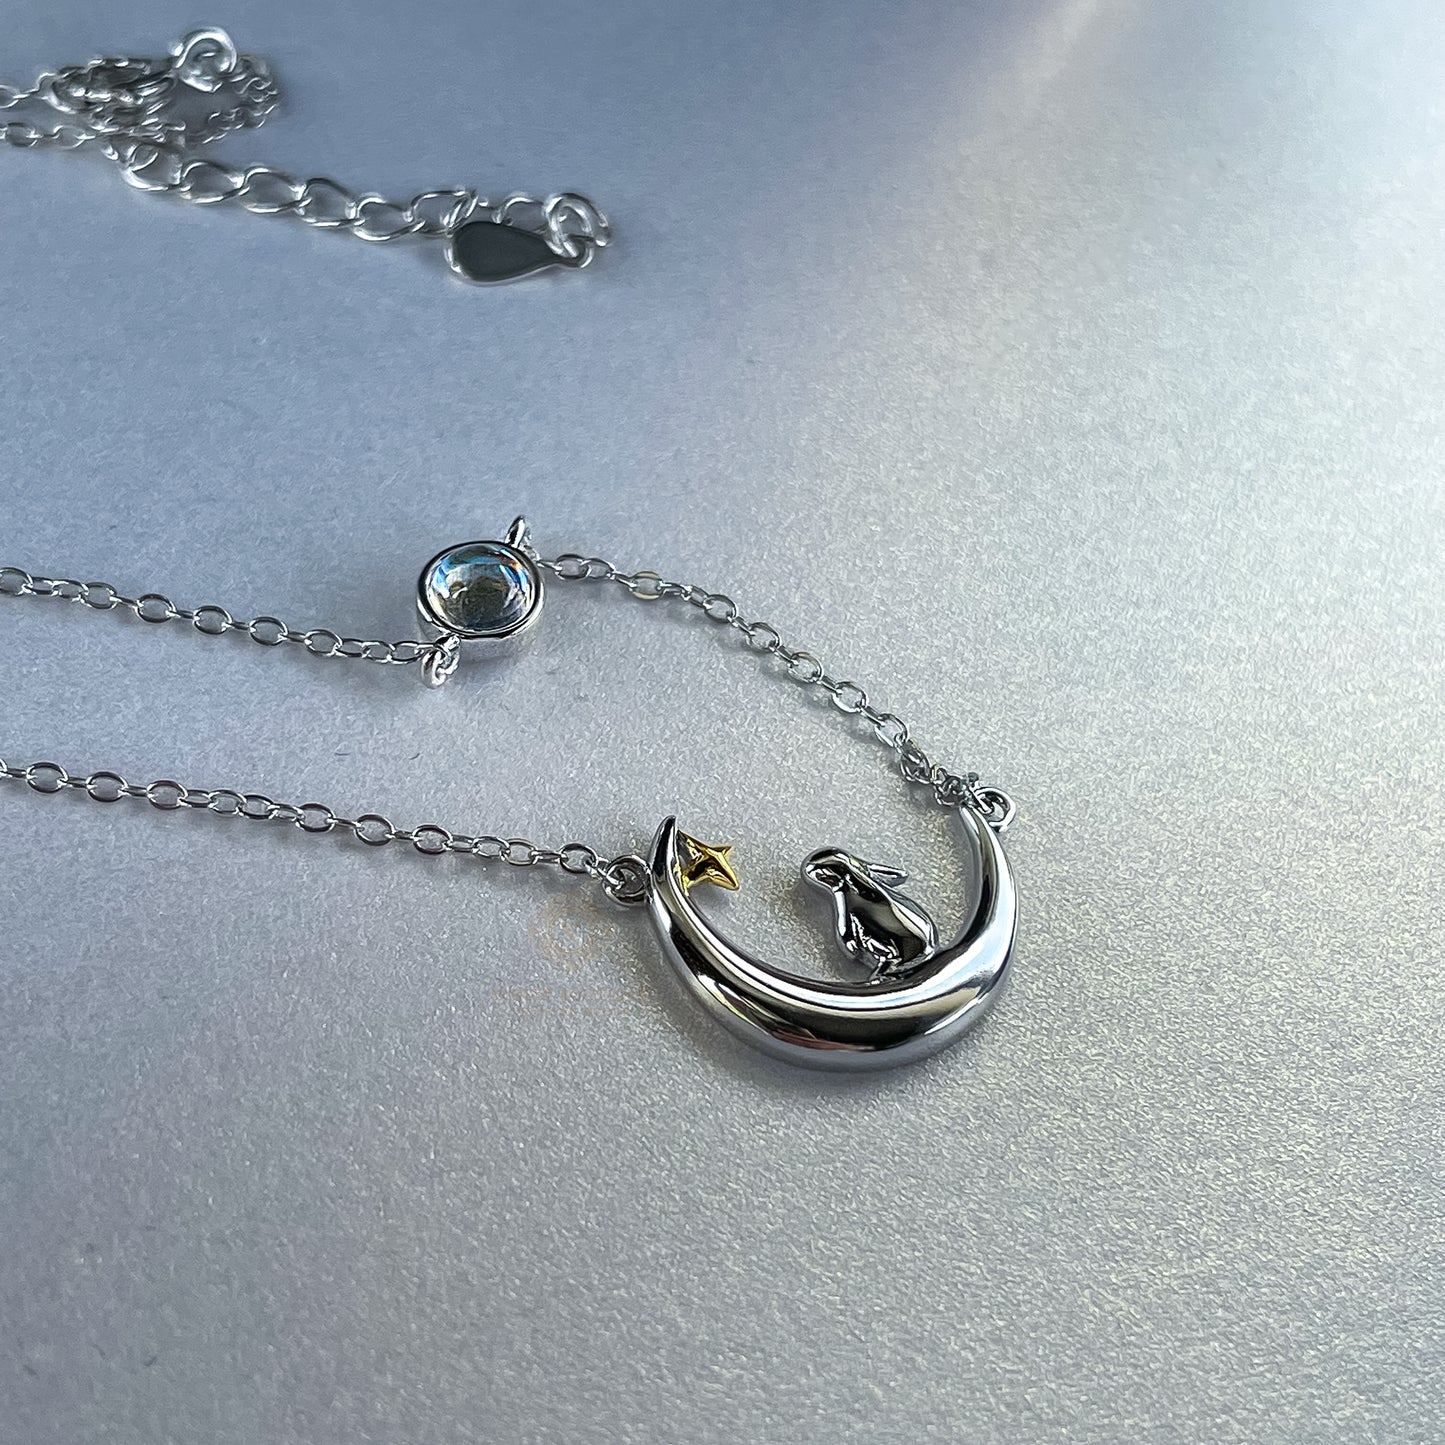 VB Sterling Silver Cute Rabbit on the Moon Necklace.